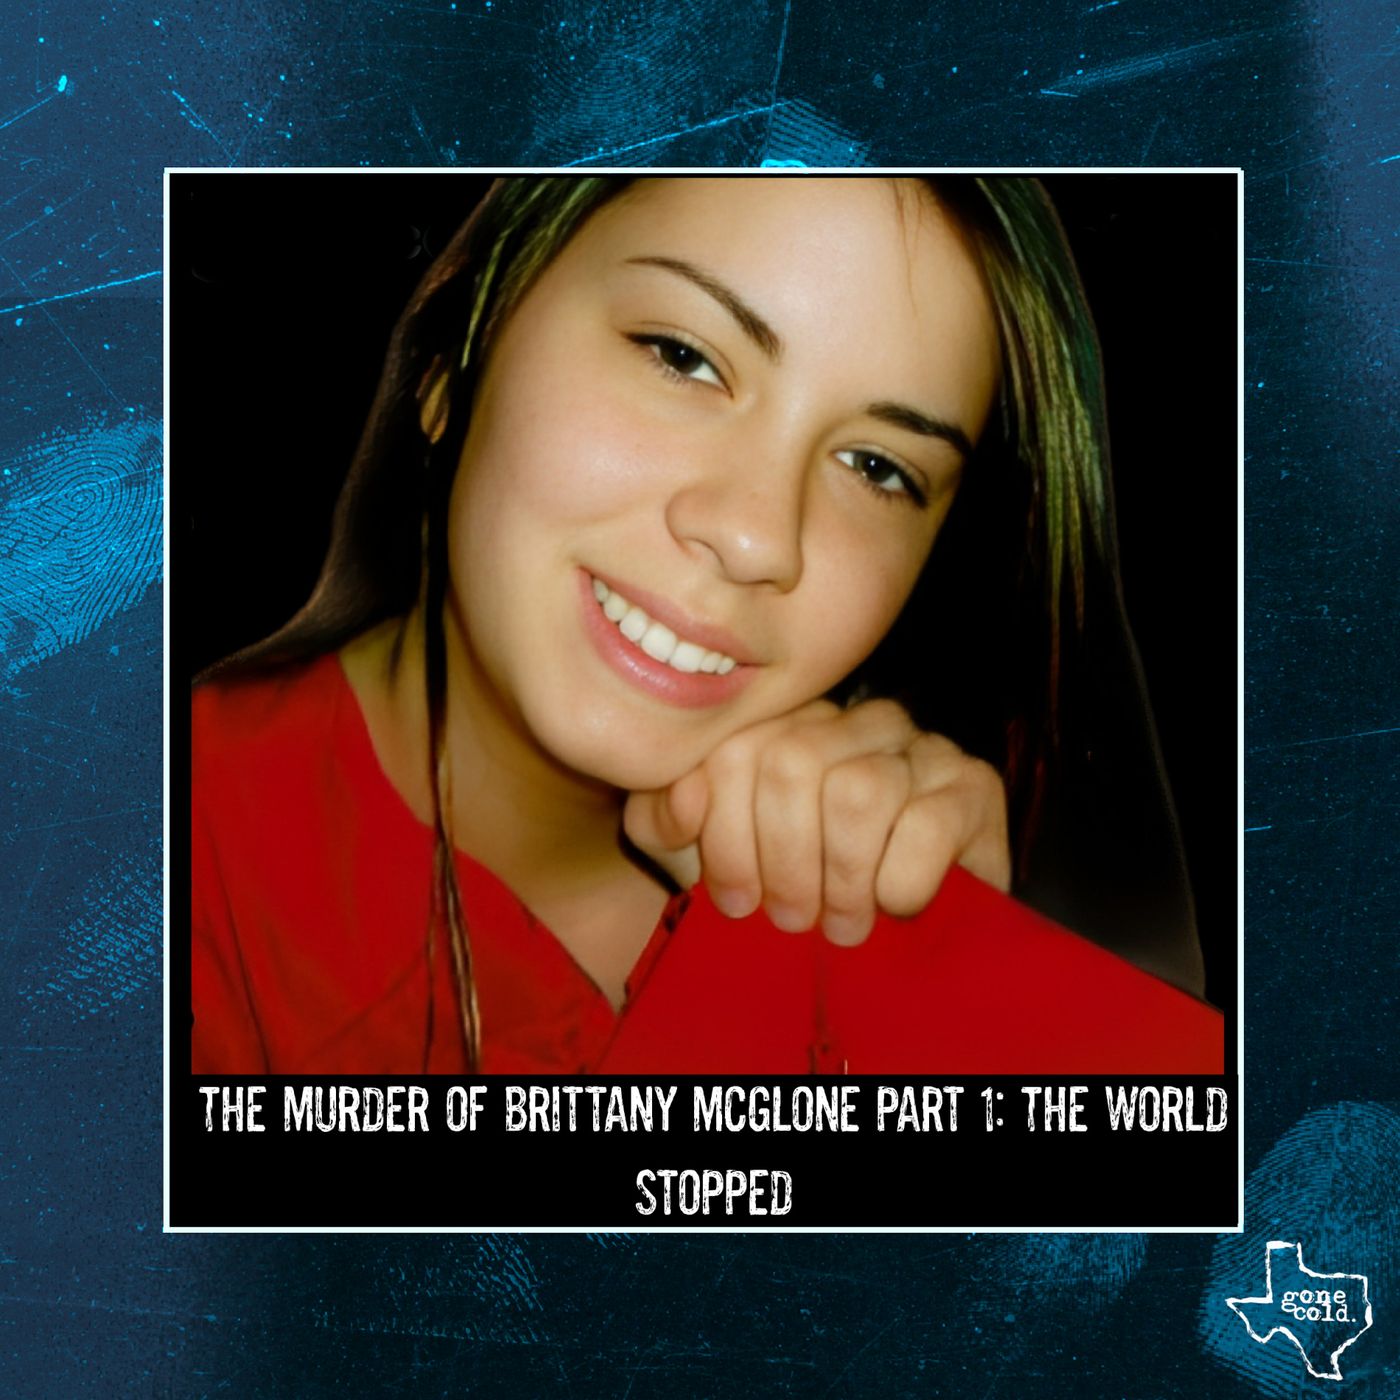 The Murder of Brittany McGlone Part 1: The World Stopped